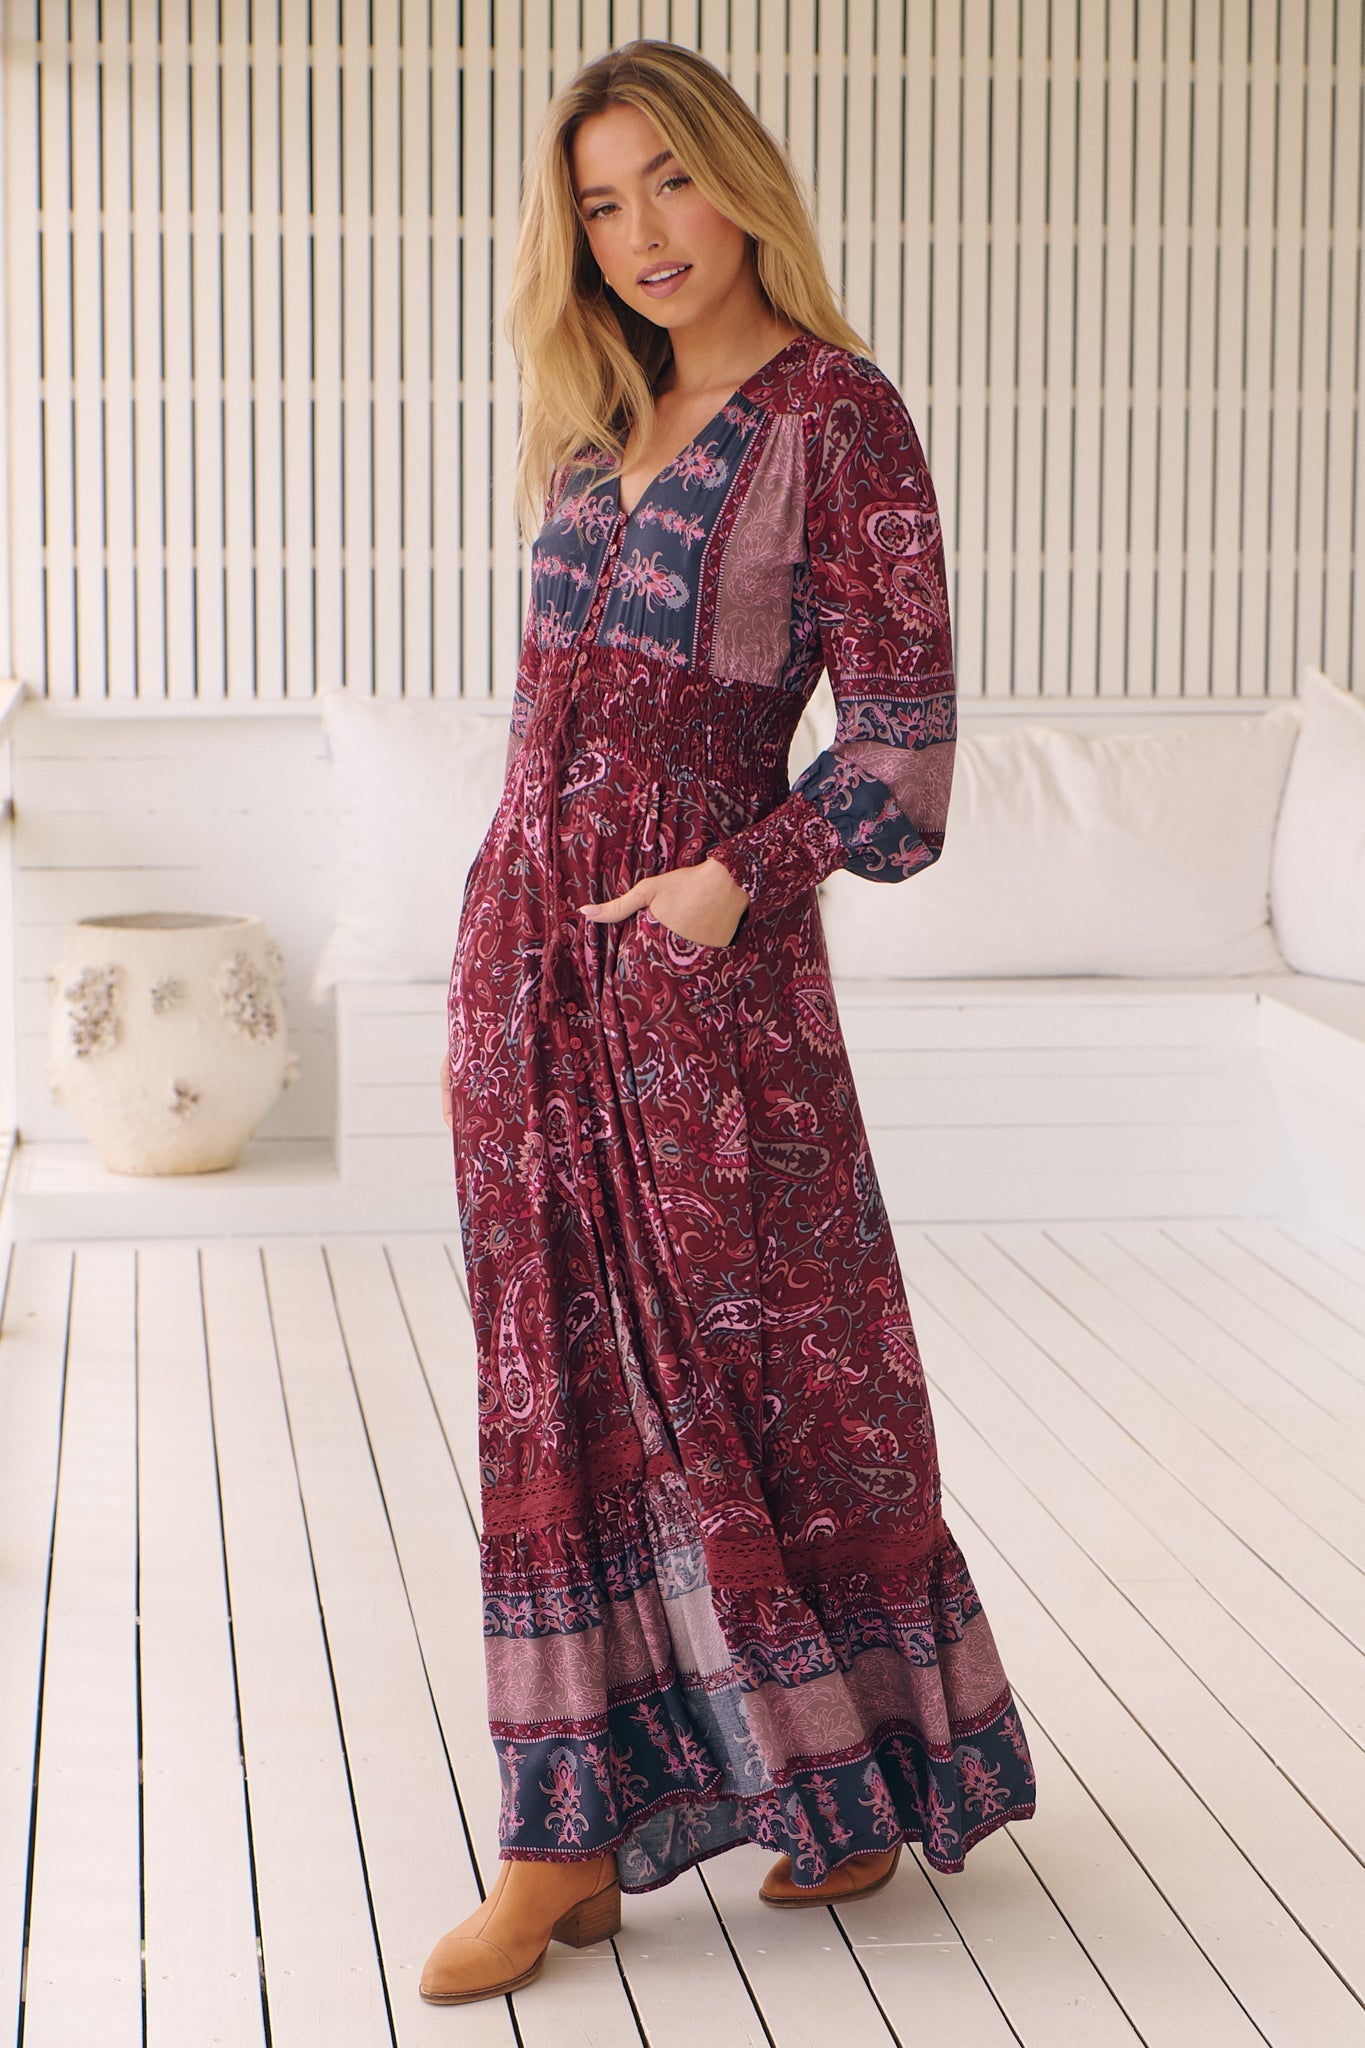 JAASE - Sabrina Maxi Dress: A Line Button Through Dress with Long Sleeves in Sadie Print